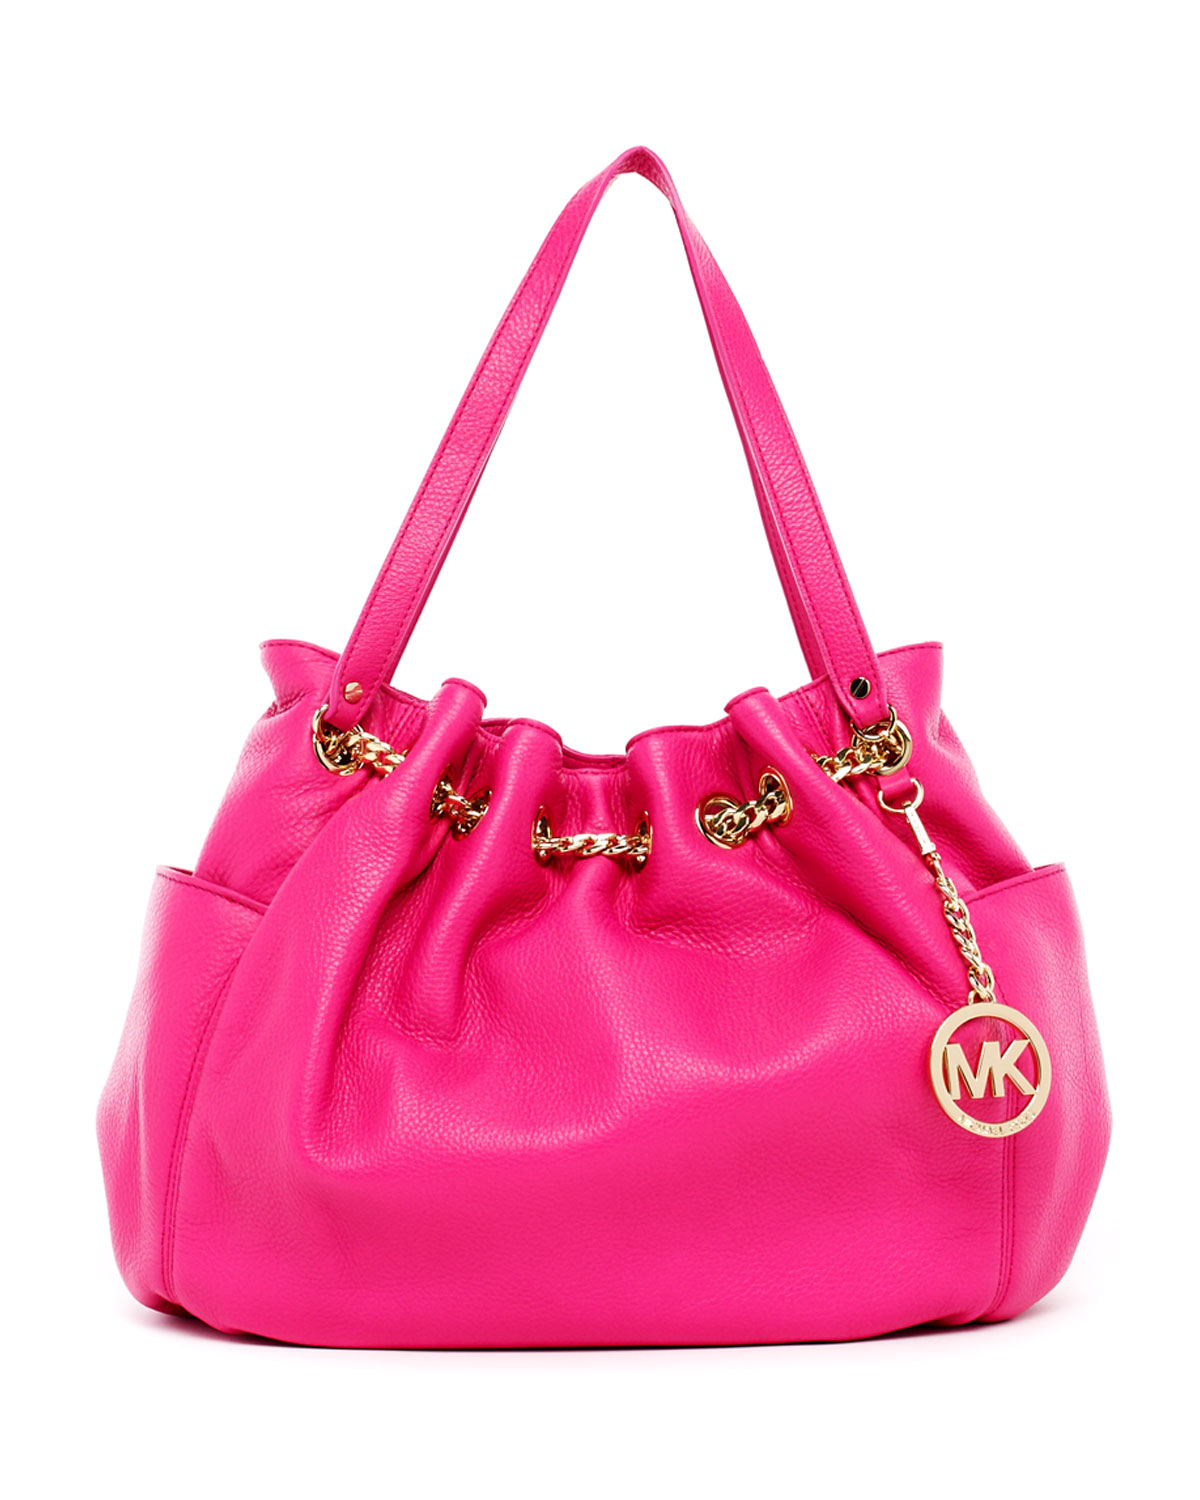 Michael Kors Jet Set Chain Ring Tote Zinnia in Pink - Lyst